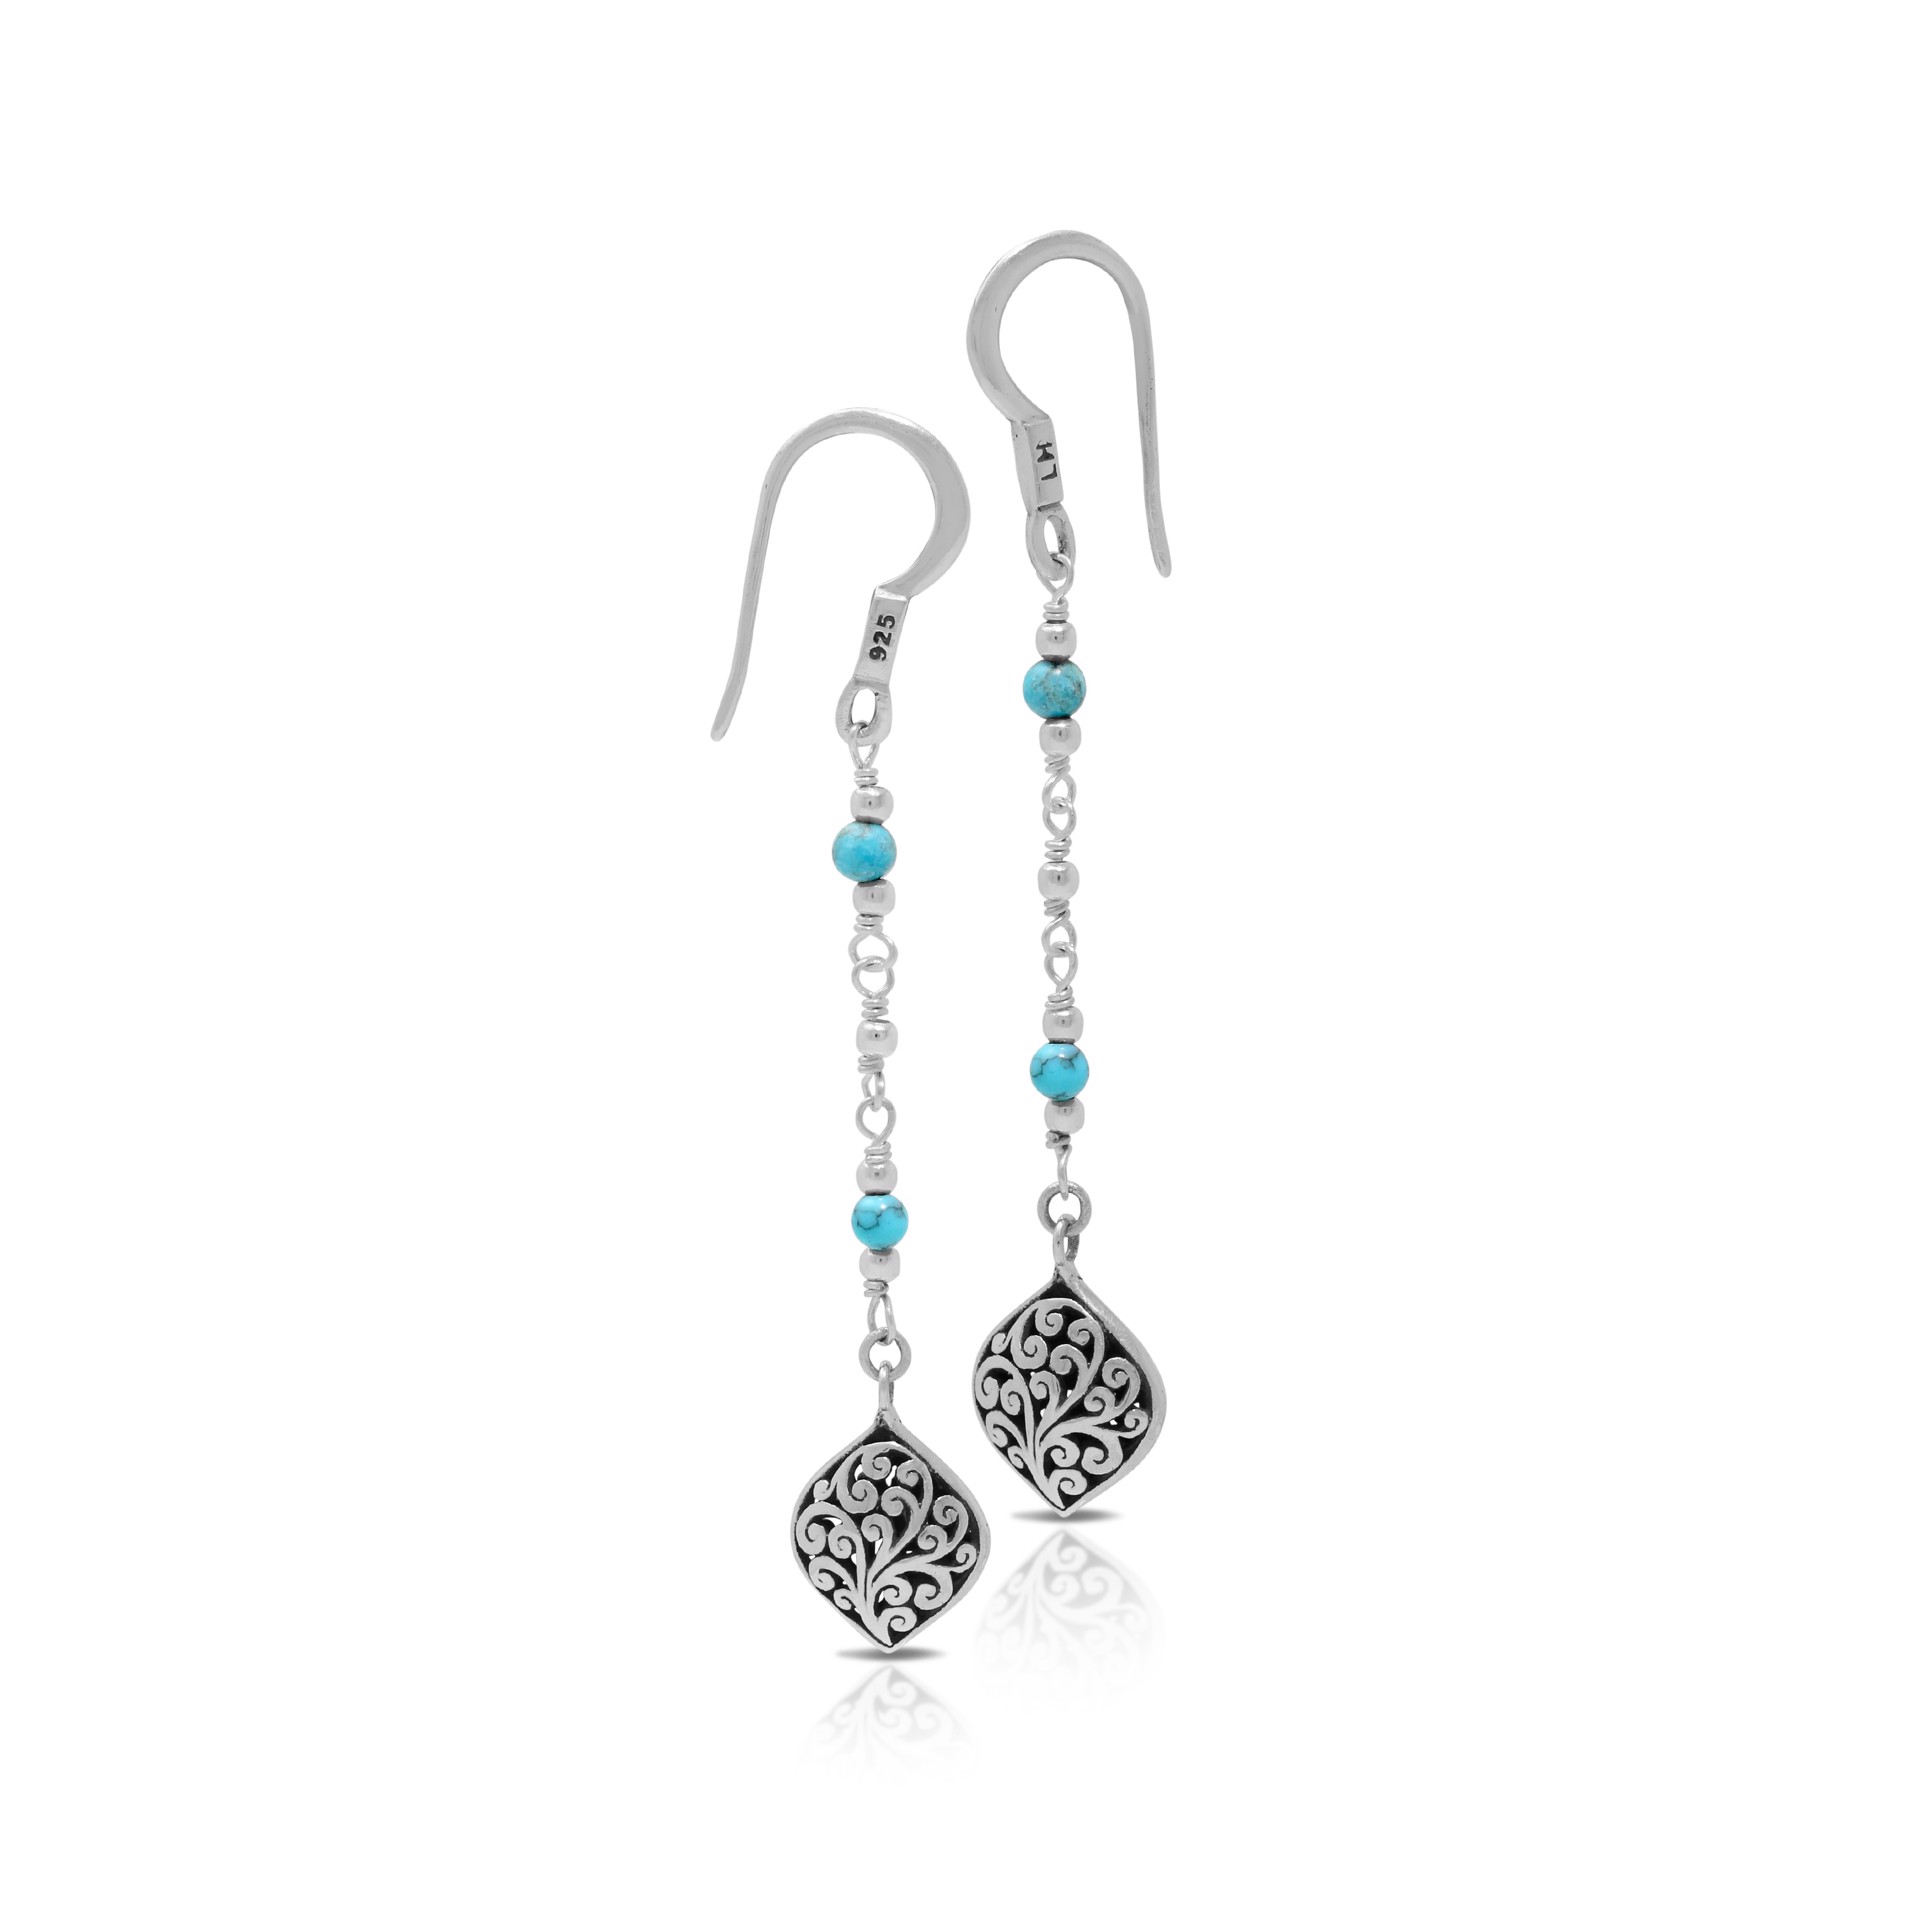 Sterling Silver Fishhook Earrings with Signature LH Carving Charms with Blue Turquoise Beads by Lois Hill